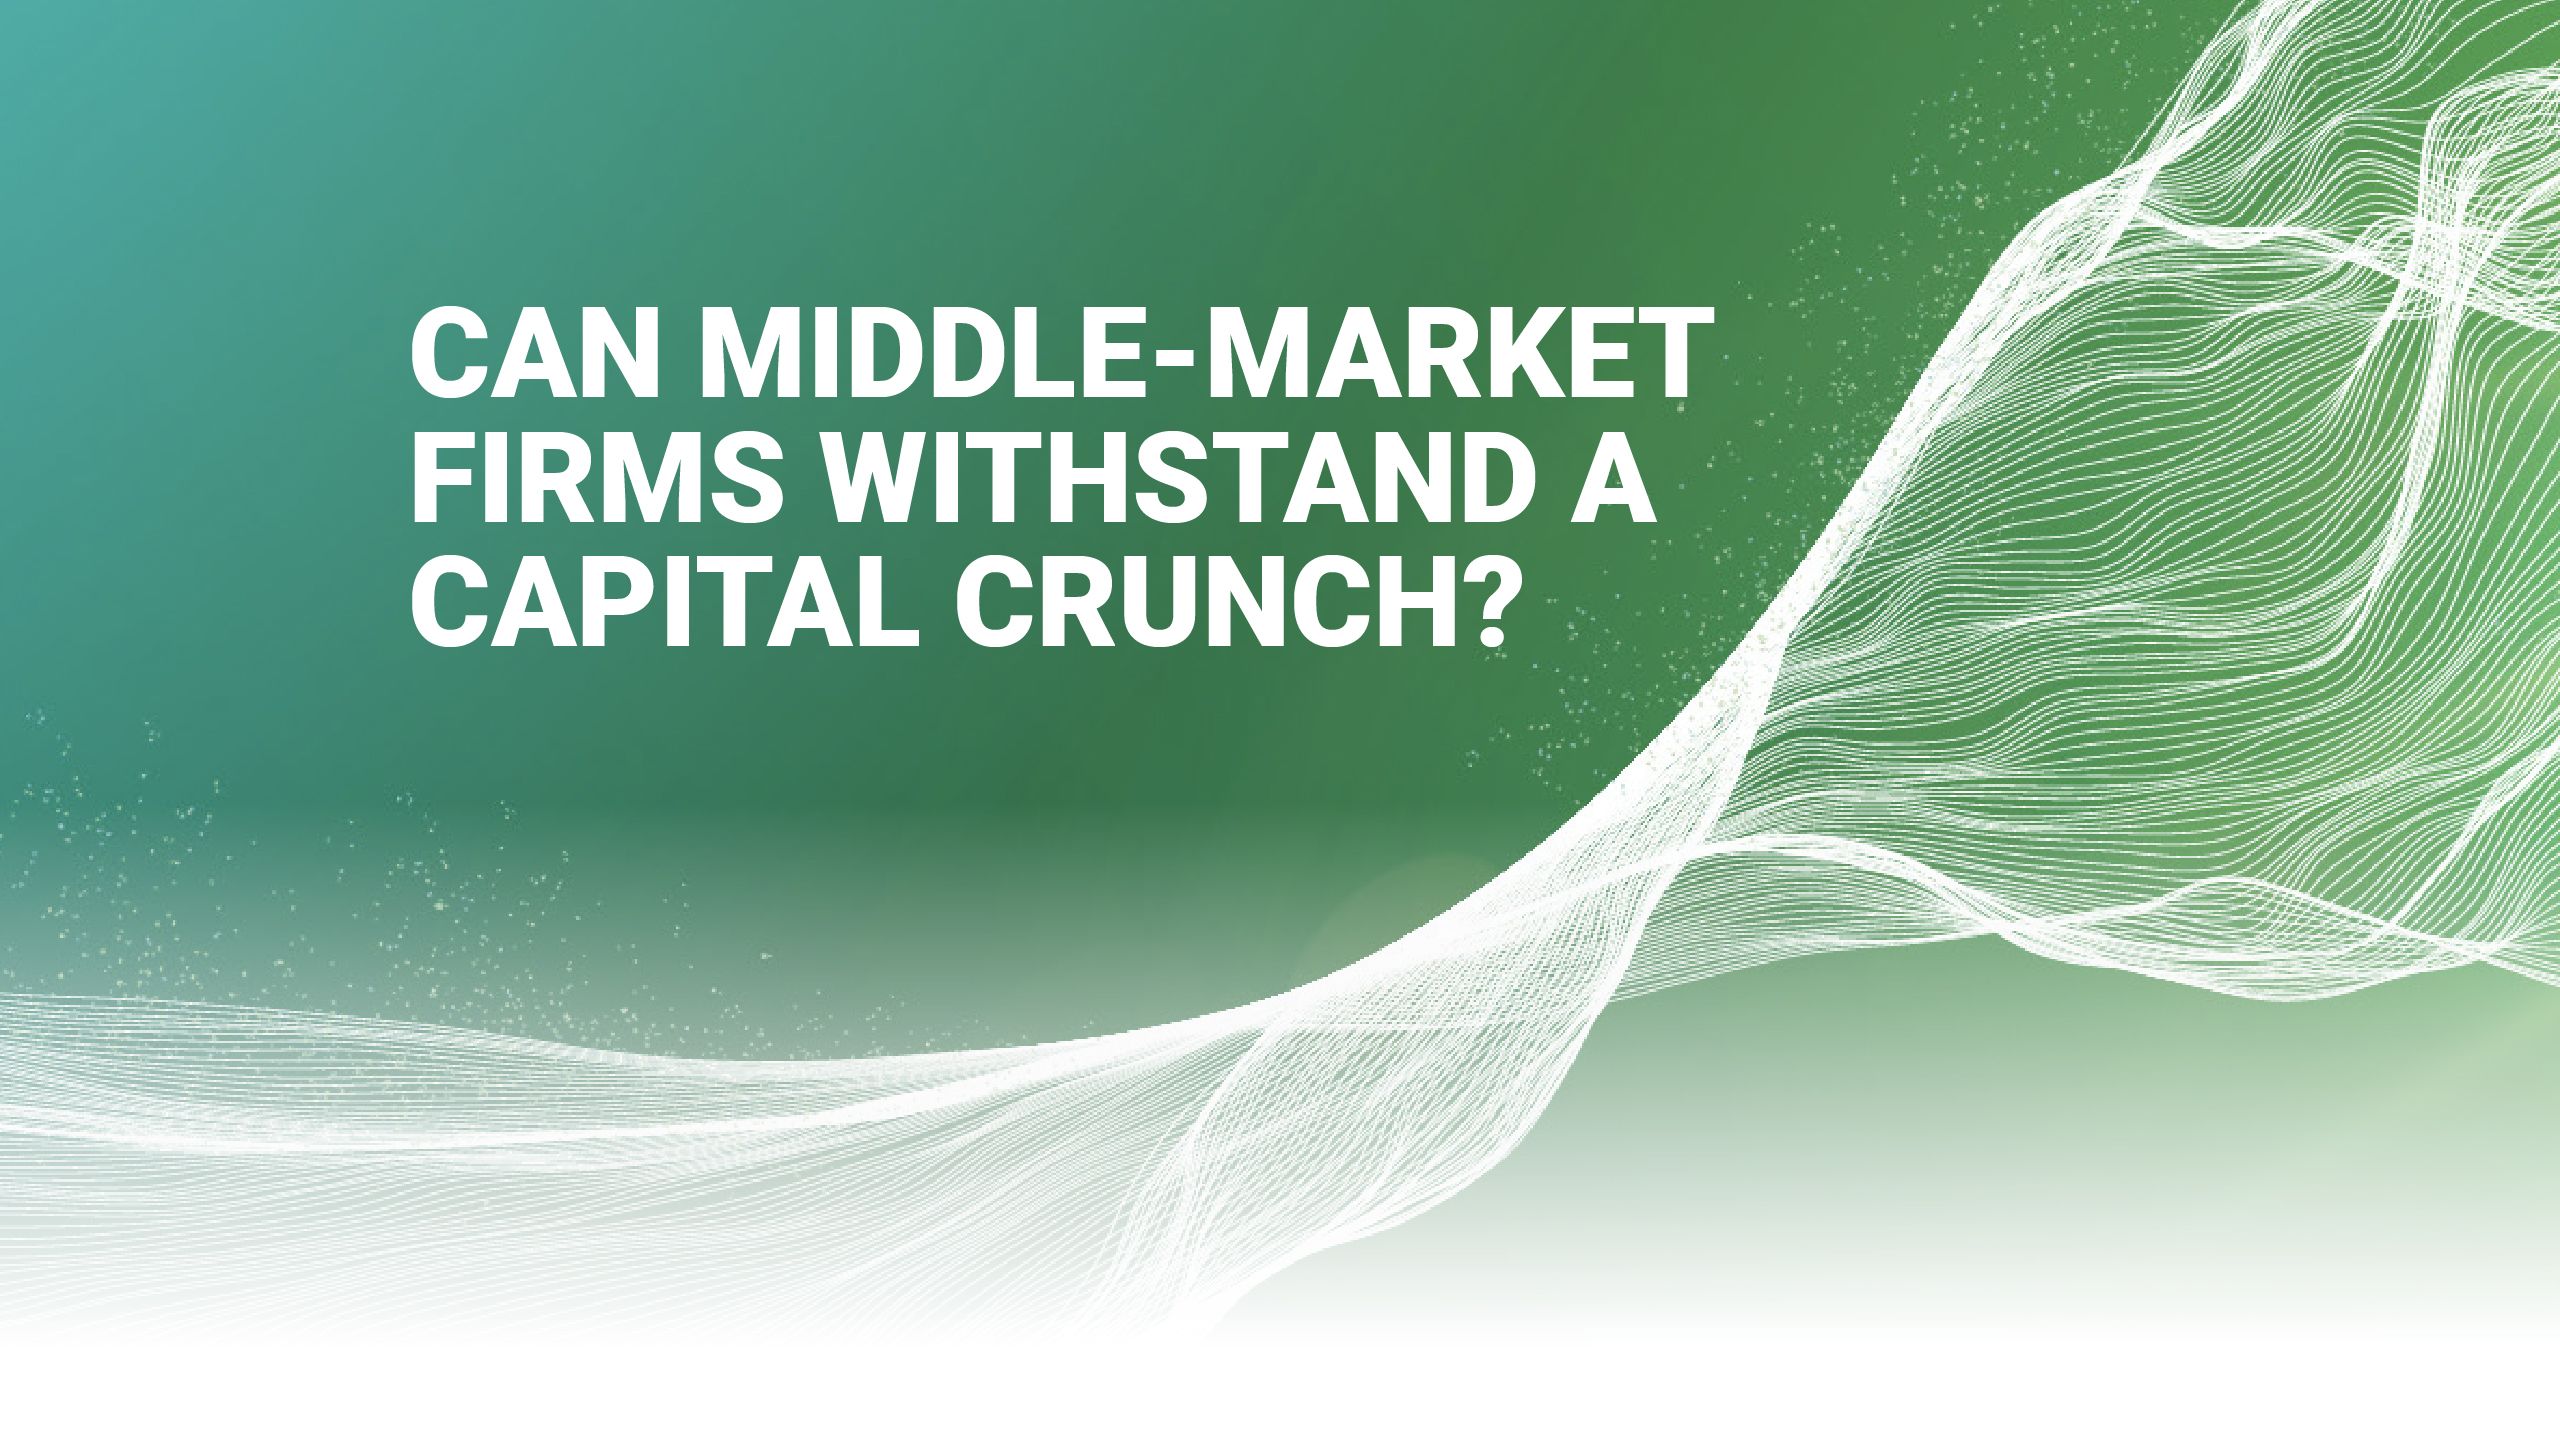 Can middle-market firms withstand a capital crunch?